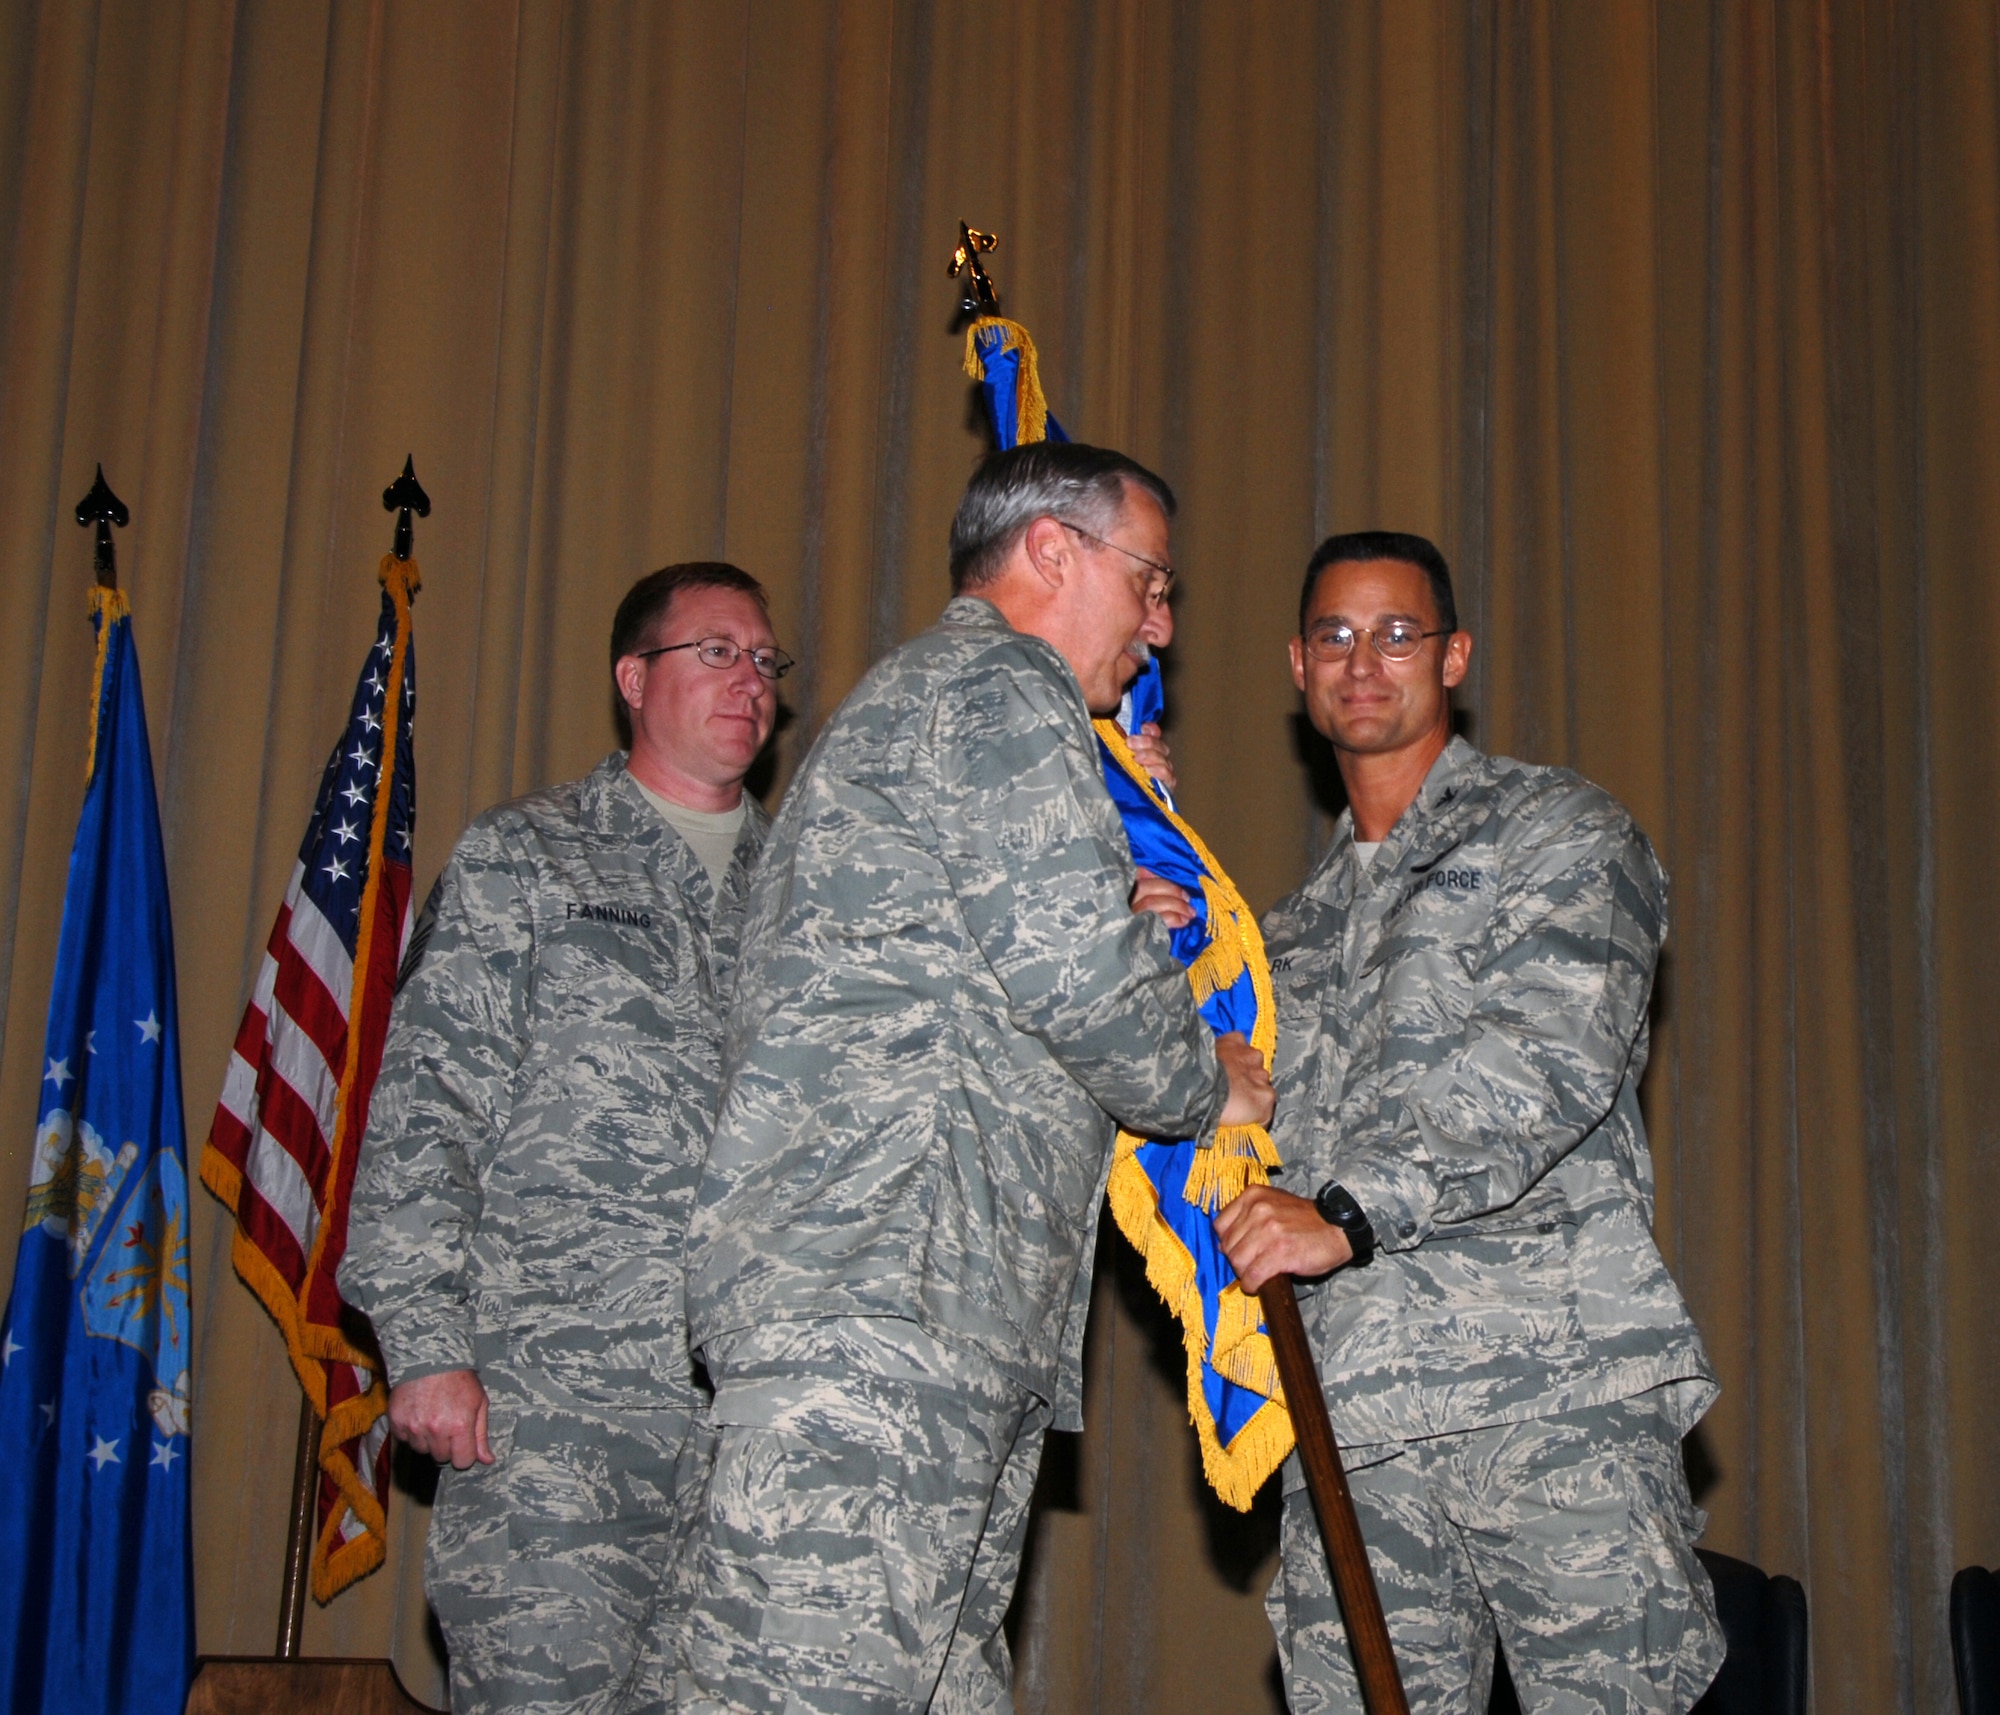 Col. Brett J. Clark, right, accepts the 908th Airlift Wing flag from Maj. Gen. Martin M. Mazick, signifying assumption of command responsibility for the Montgomery-based C-130 flying unit. As commander of Air Force Reserve Command?s 22nd Air Force, General Mazick oversees 10 C-130s unit across the nation. Colonel Clark's last duty position before coming to Maxwell was commander, 440th Operations Group, 440th Airlift Wing, Pope AFB, N.C.
(U.S. Air Force photo by Mr. Jeff Melvin)